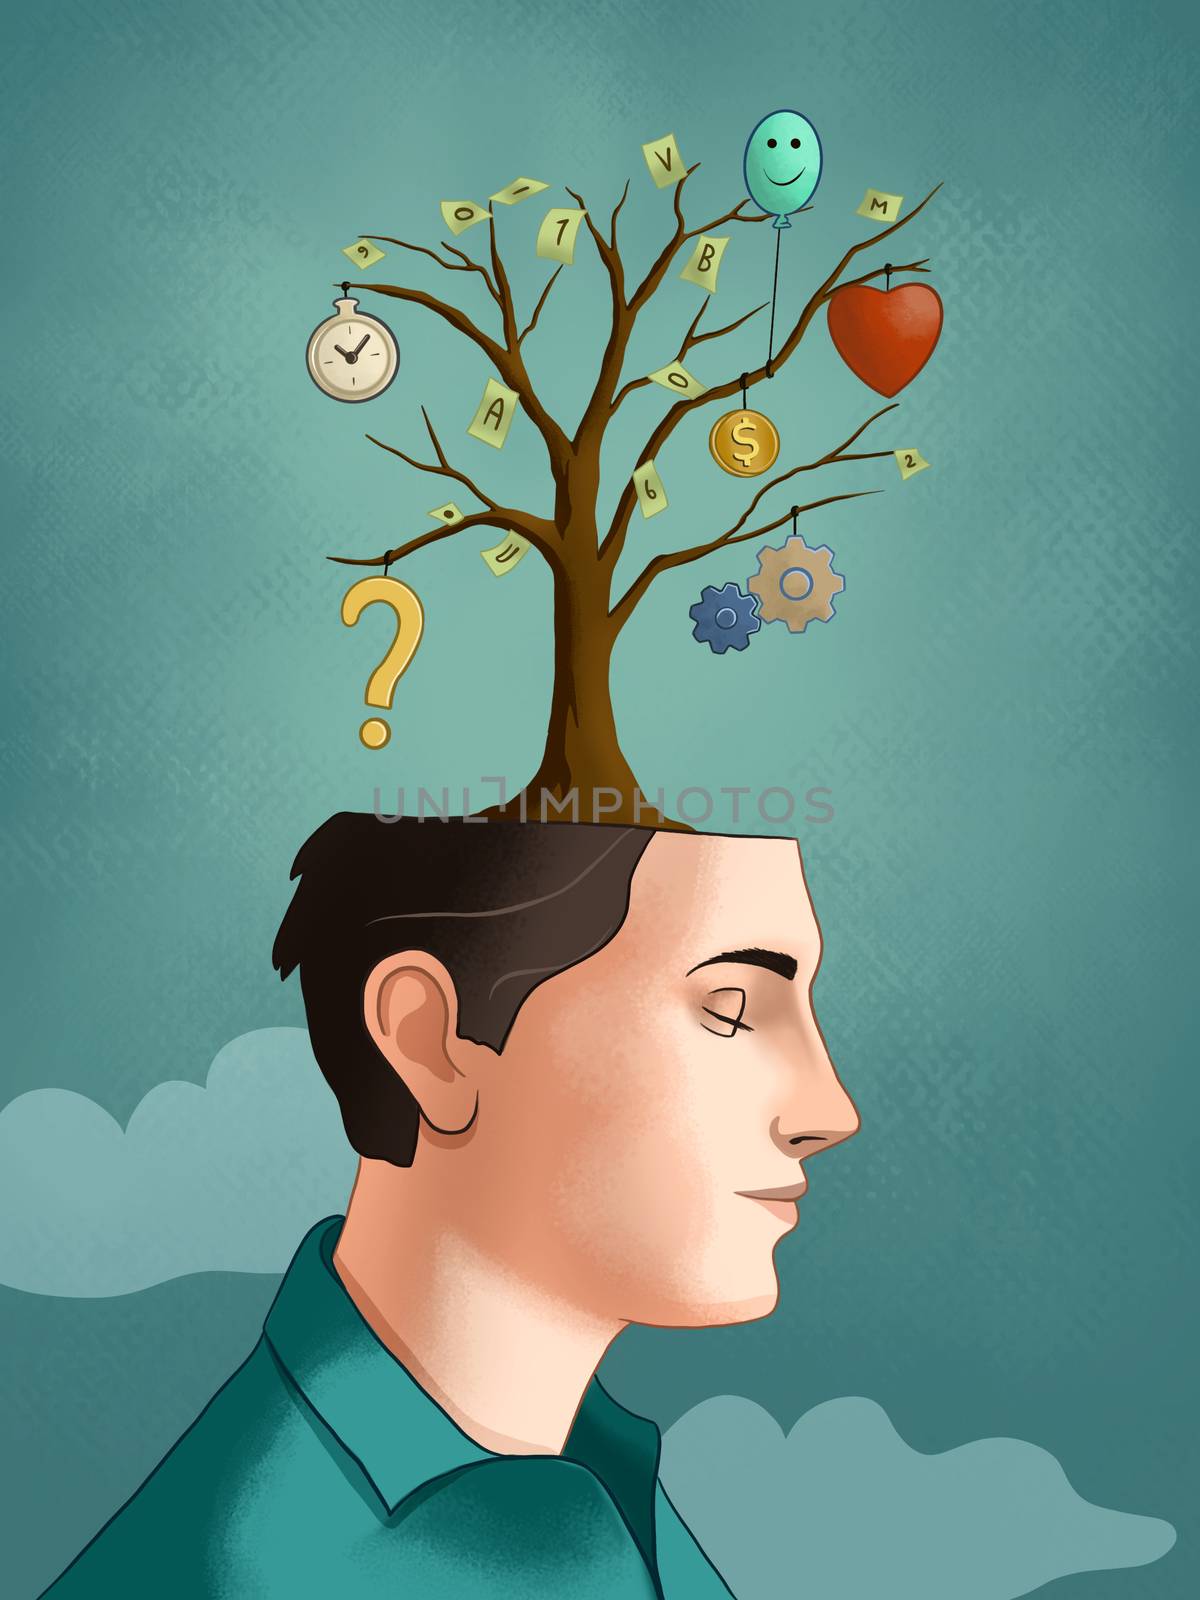 Tree growing from a young male's head, with different thoughts developing from each branch. Digital illustration.